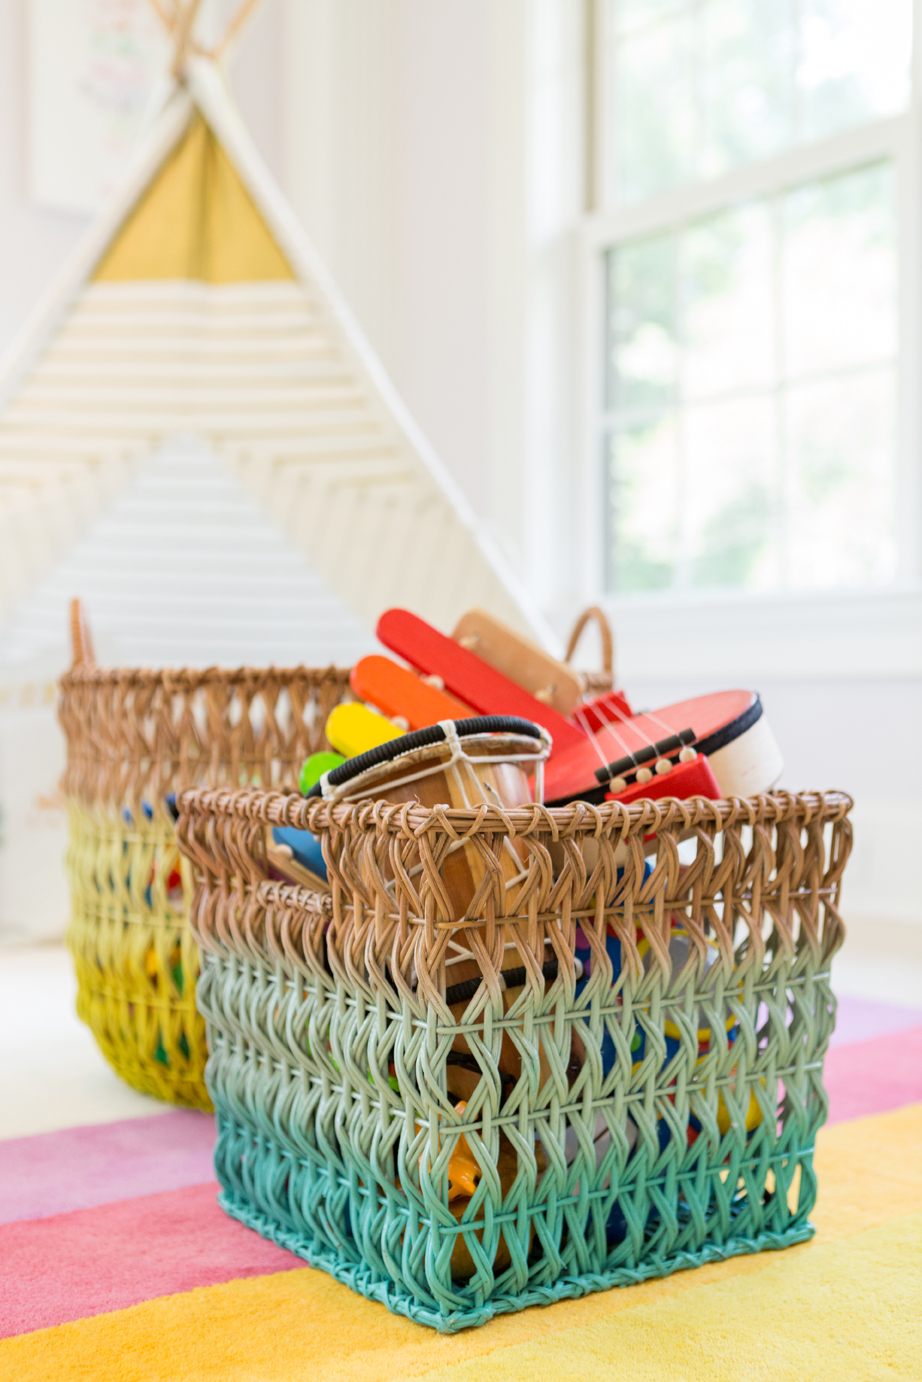 Ombre Rattan Baskets from The Land of Nod - Project Nursery